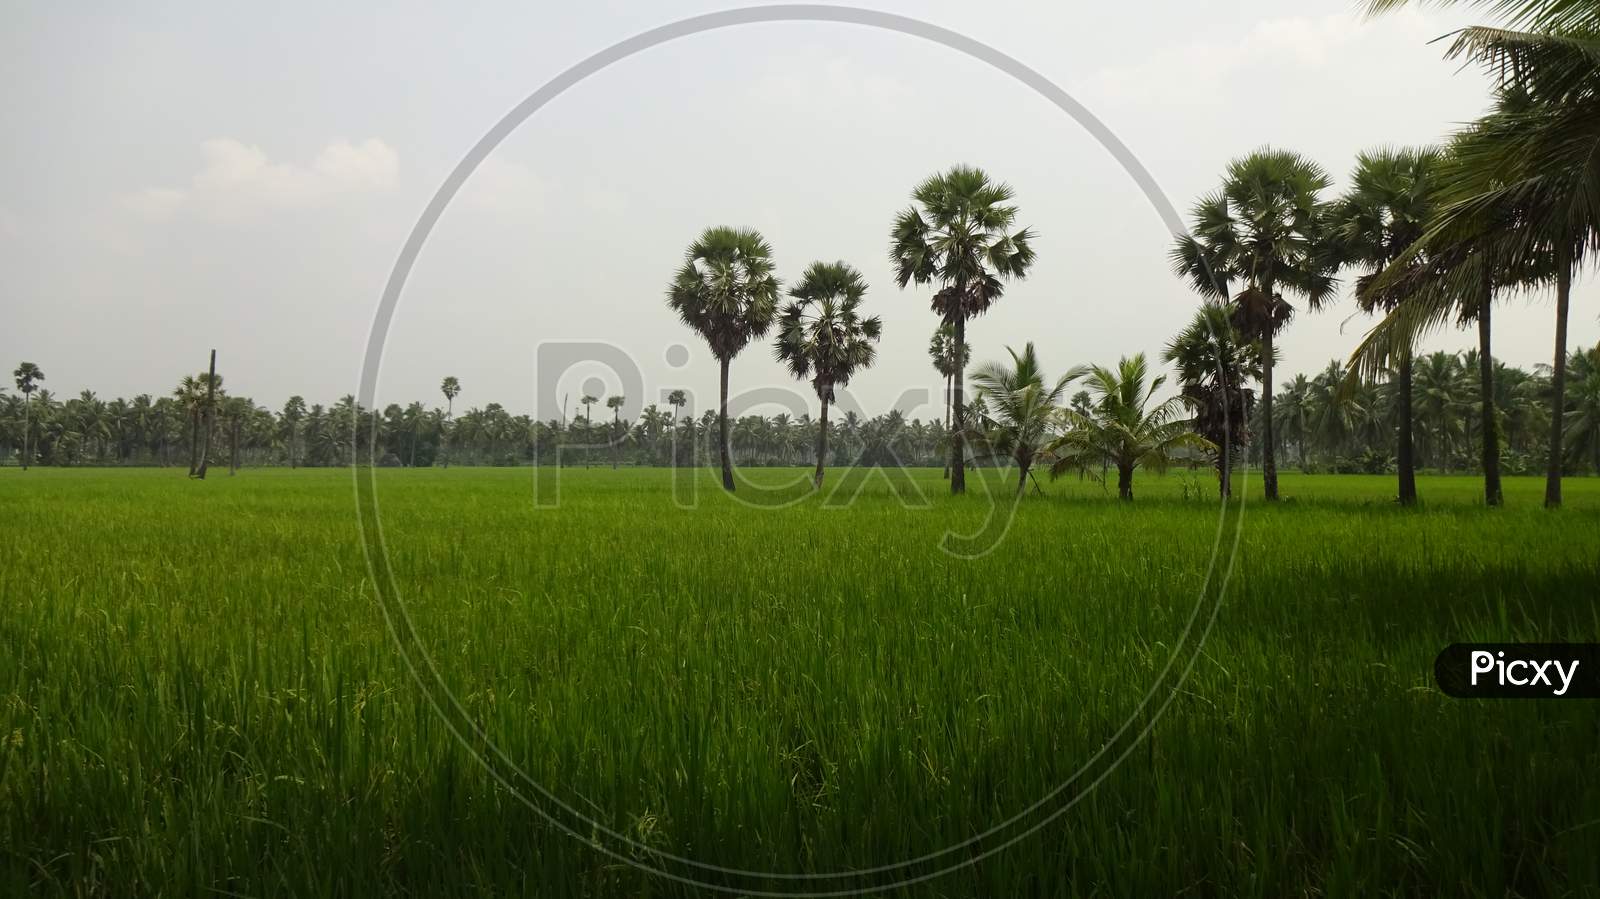 the beauty of rice fields in the village